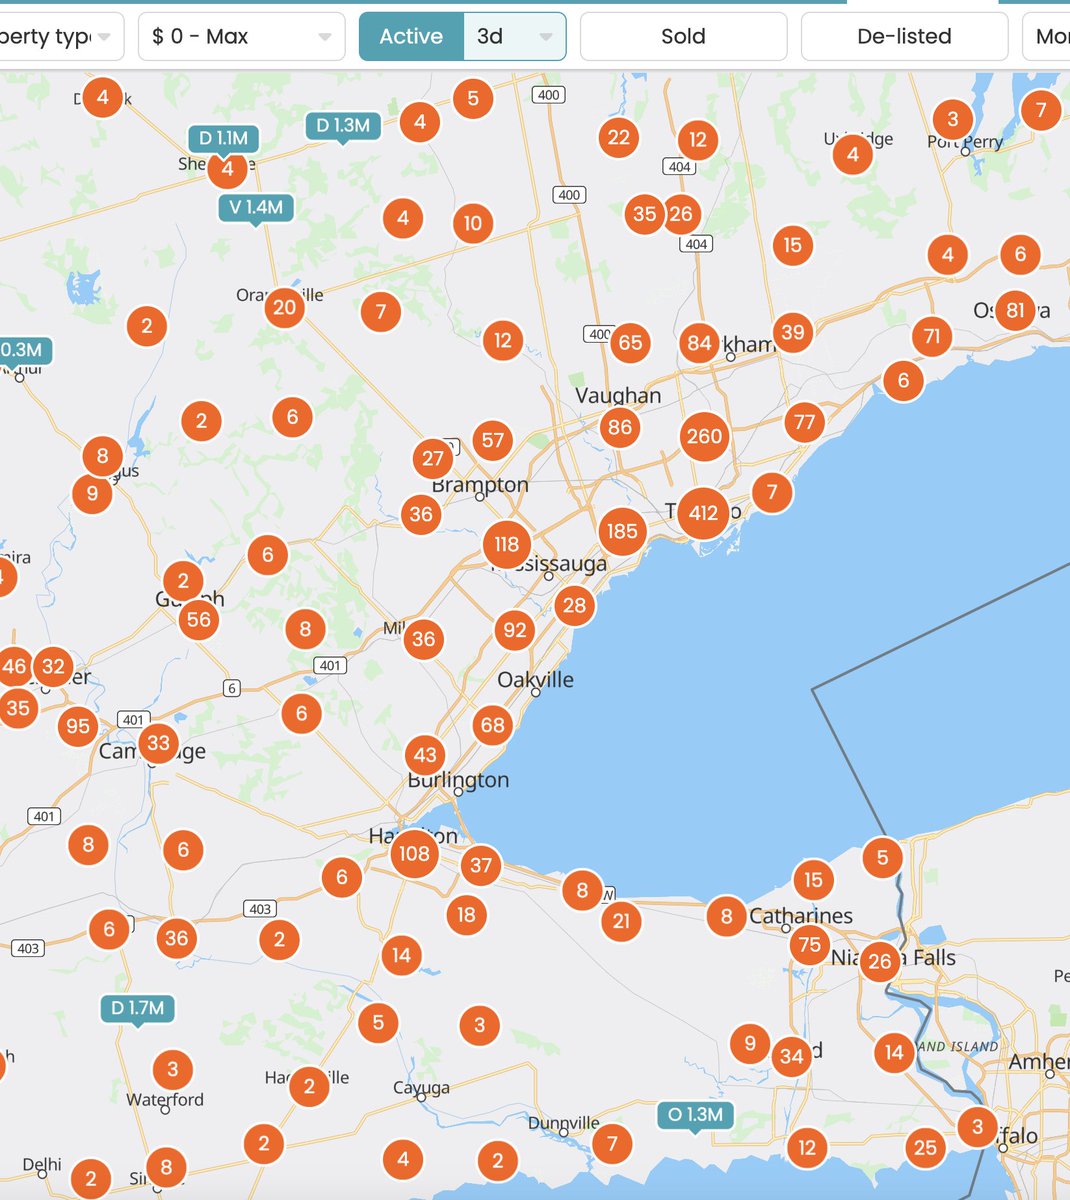 This is totally anecdotal, but I couldn't believe the amount of new listings when I opened HouseSigma yesterday. Is this normal for post-May long weekend? @daniel_foch @jesse_kleine @xelan_gta @kaitlynleeRE @JonFlynnREstats #ToRE